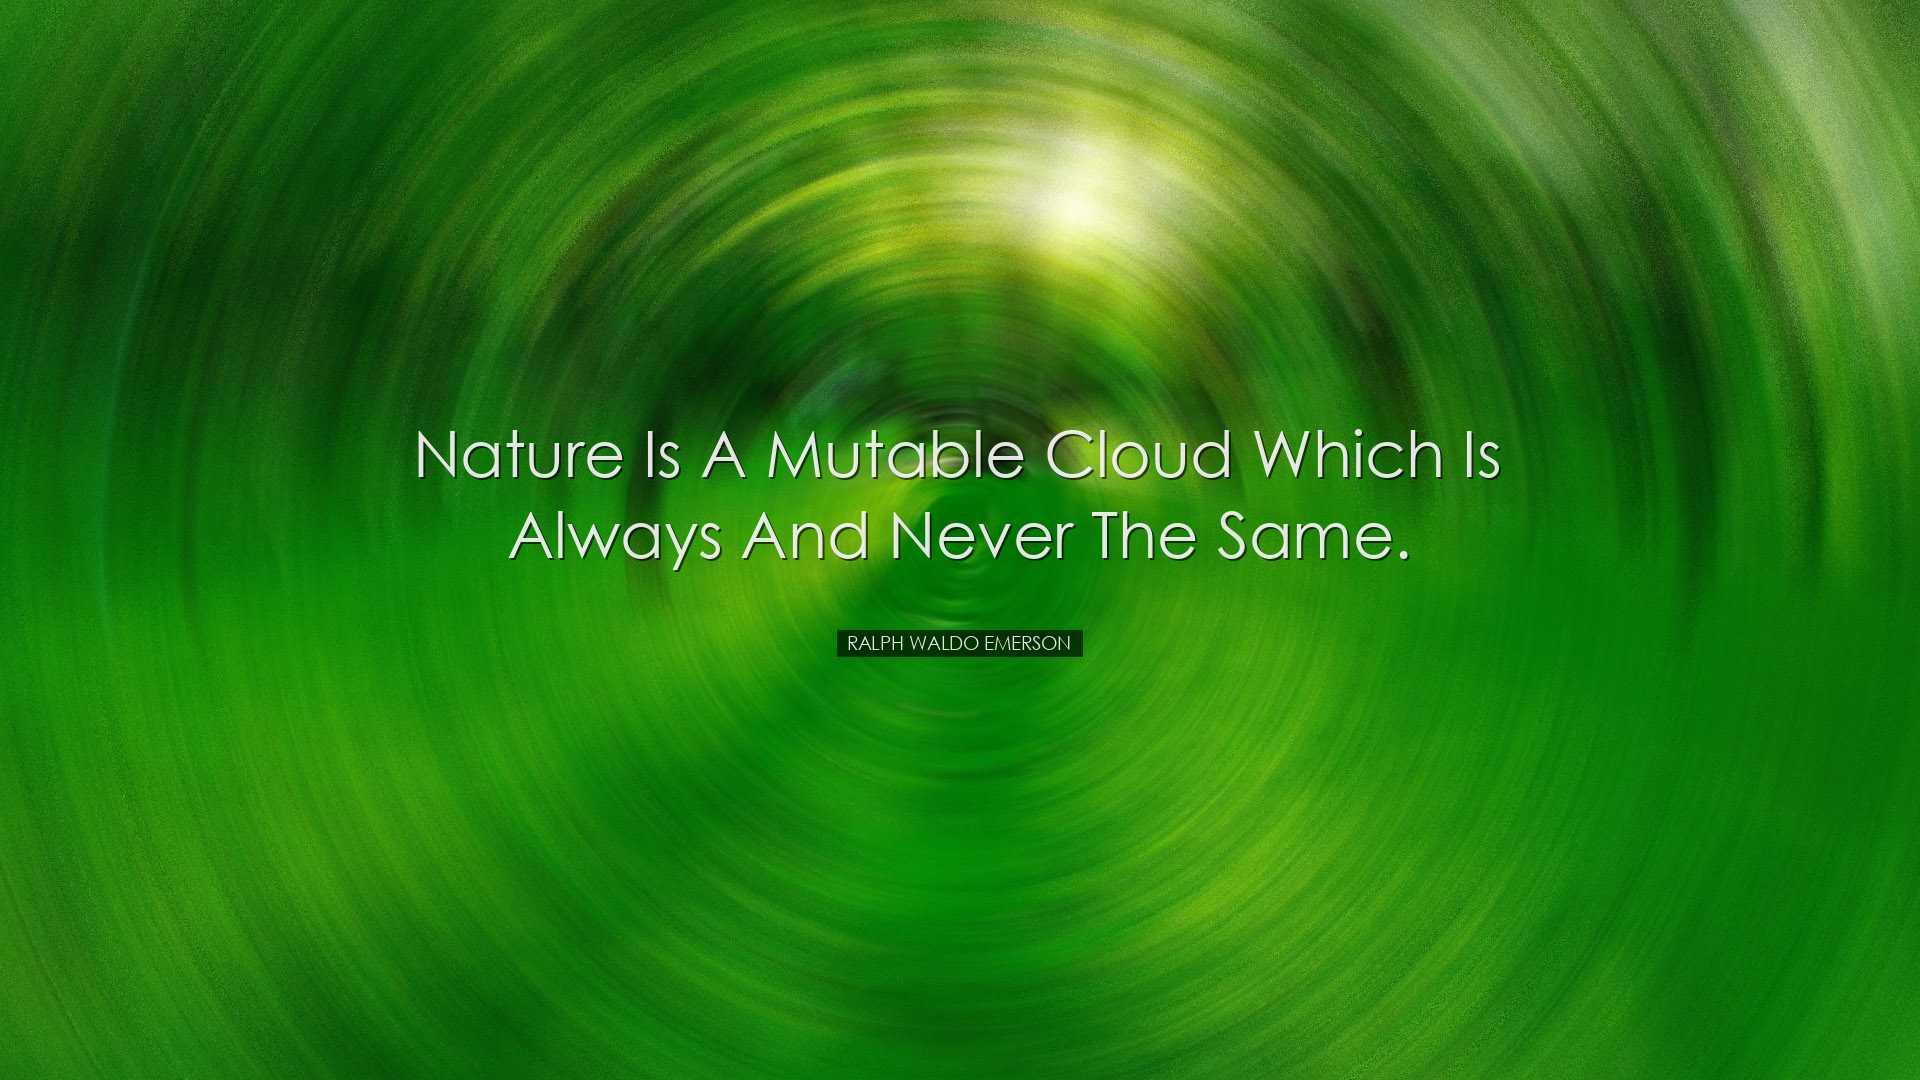 Nature is a mutable cloud which is always and never the same. - Ra